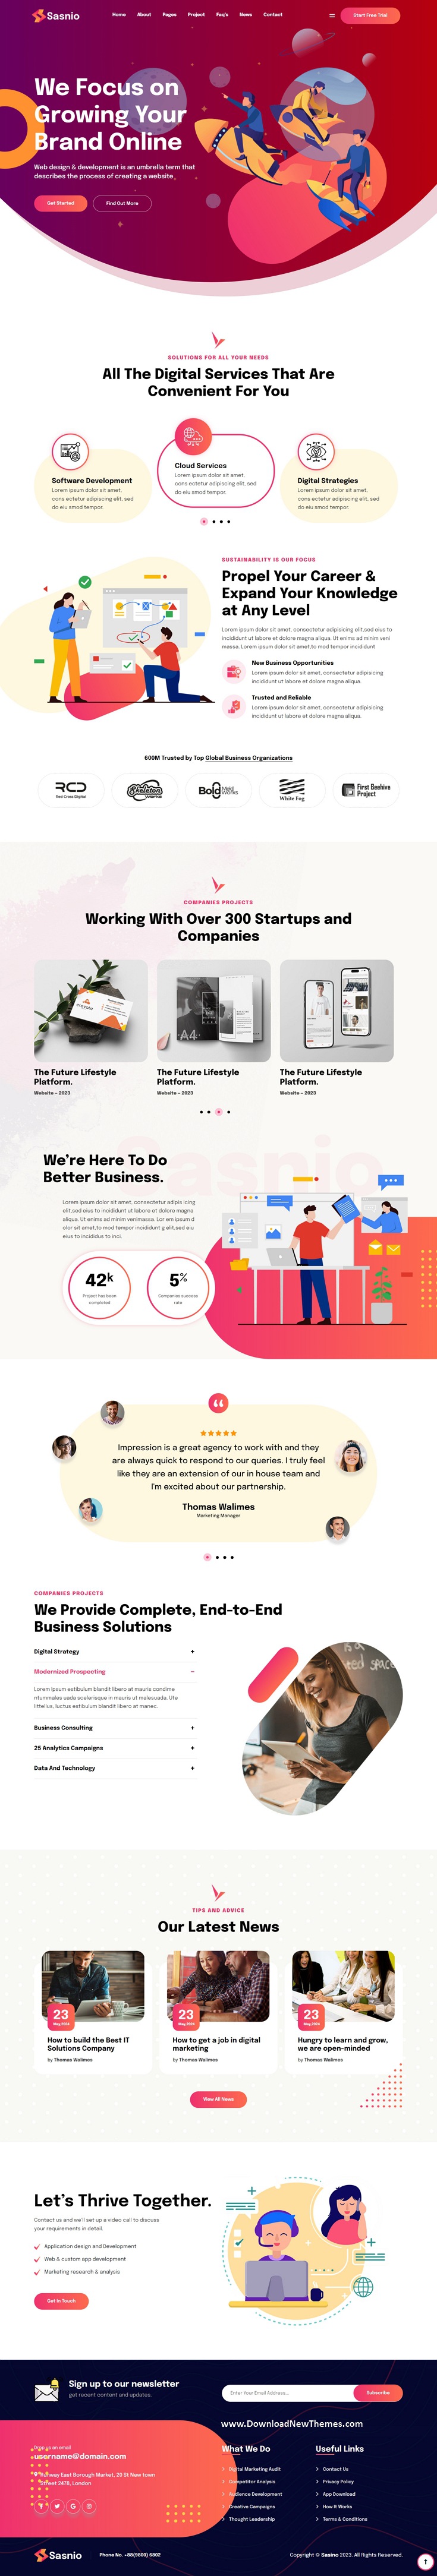 Sasnio - Software, SaaS & Startup HTML5 Template Review